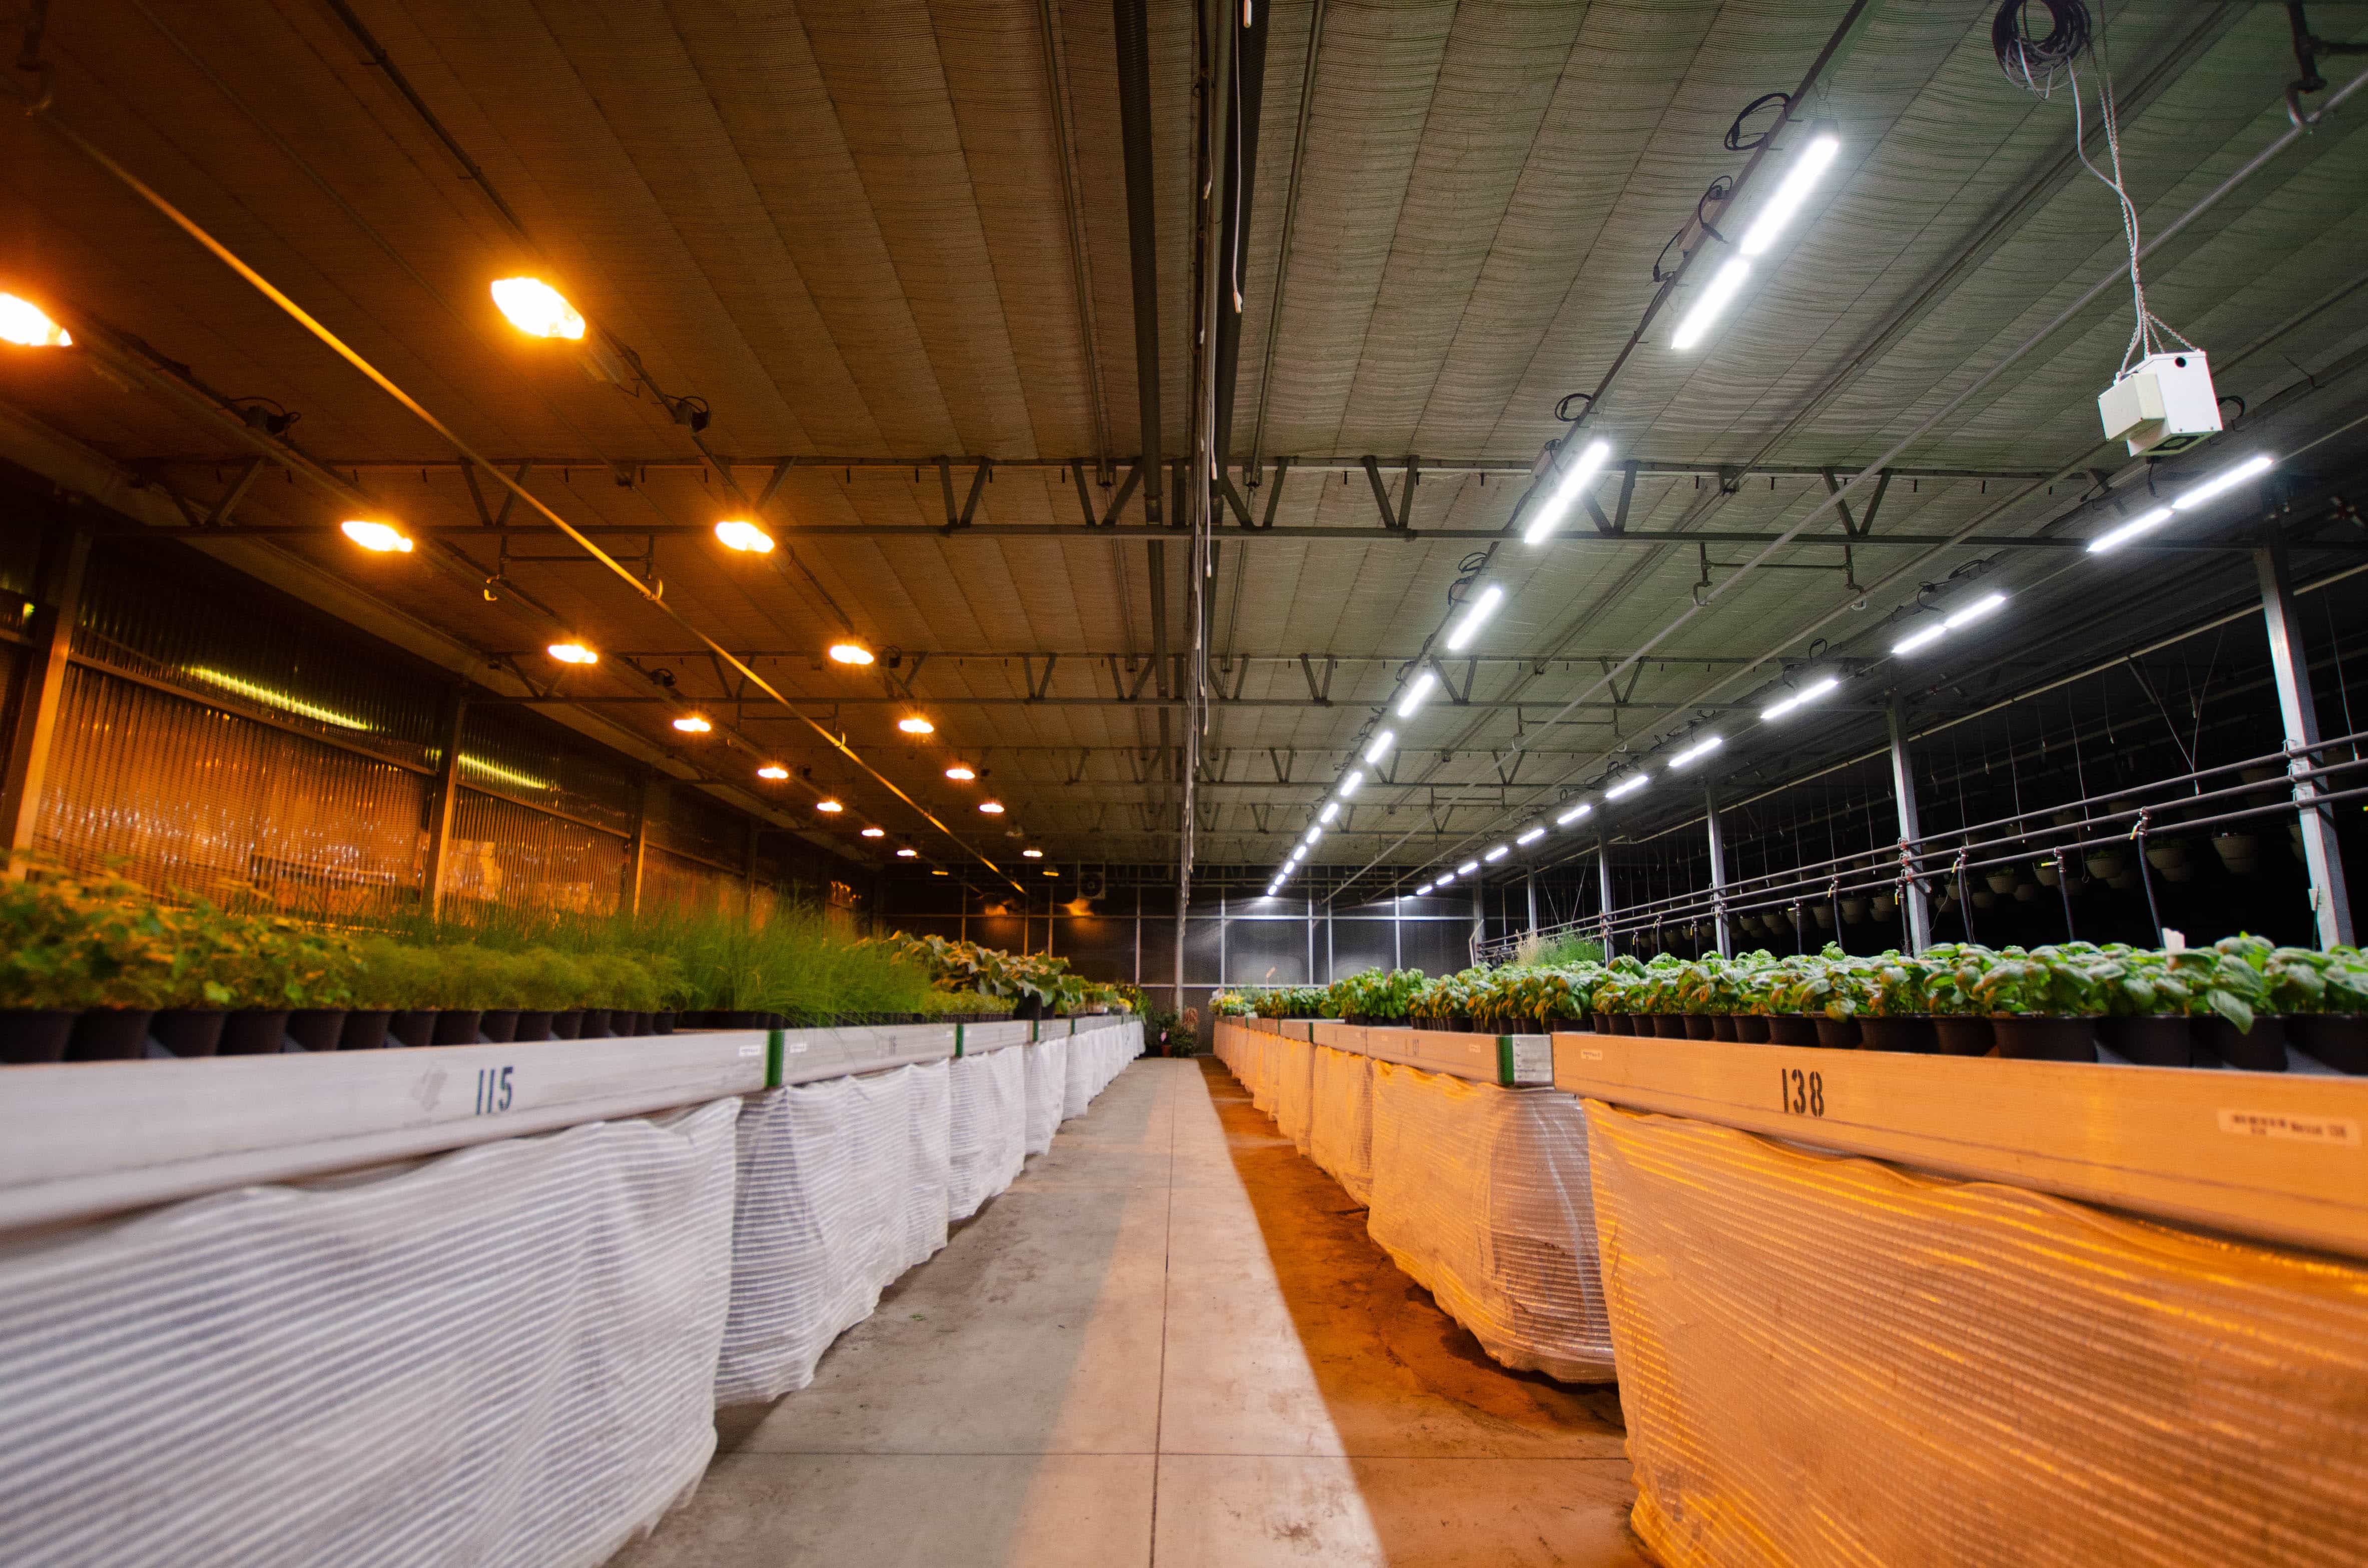 Peace Tree Farm is transitioning from HPS lighting to Fluence VYPRx PLUS LED lighting and has reduced plant loss by 40% as a result